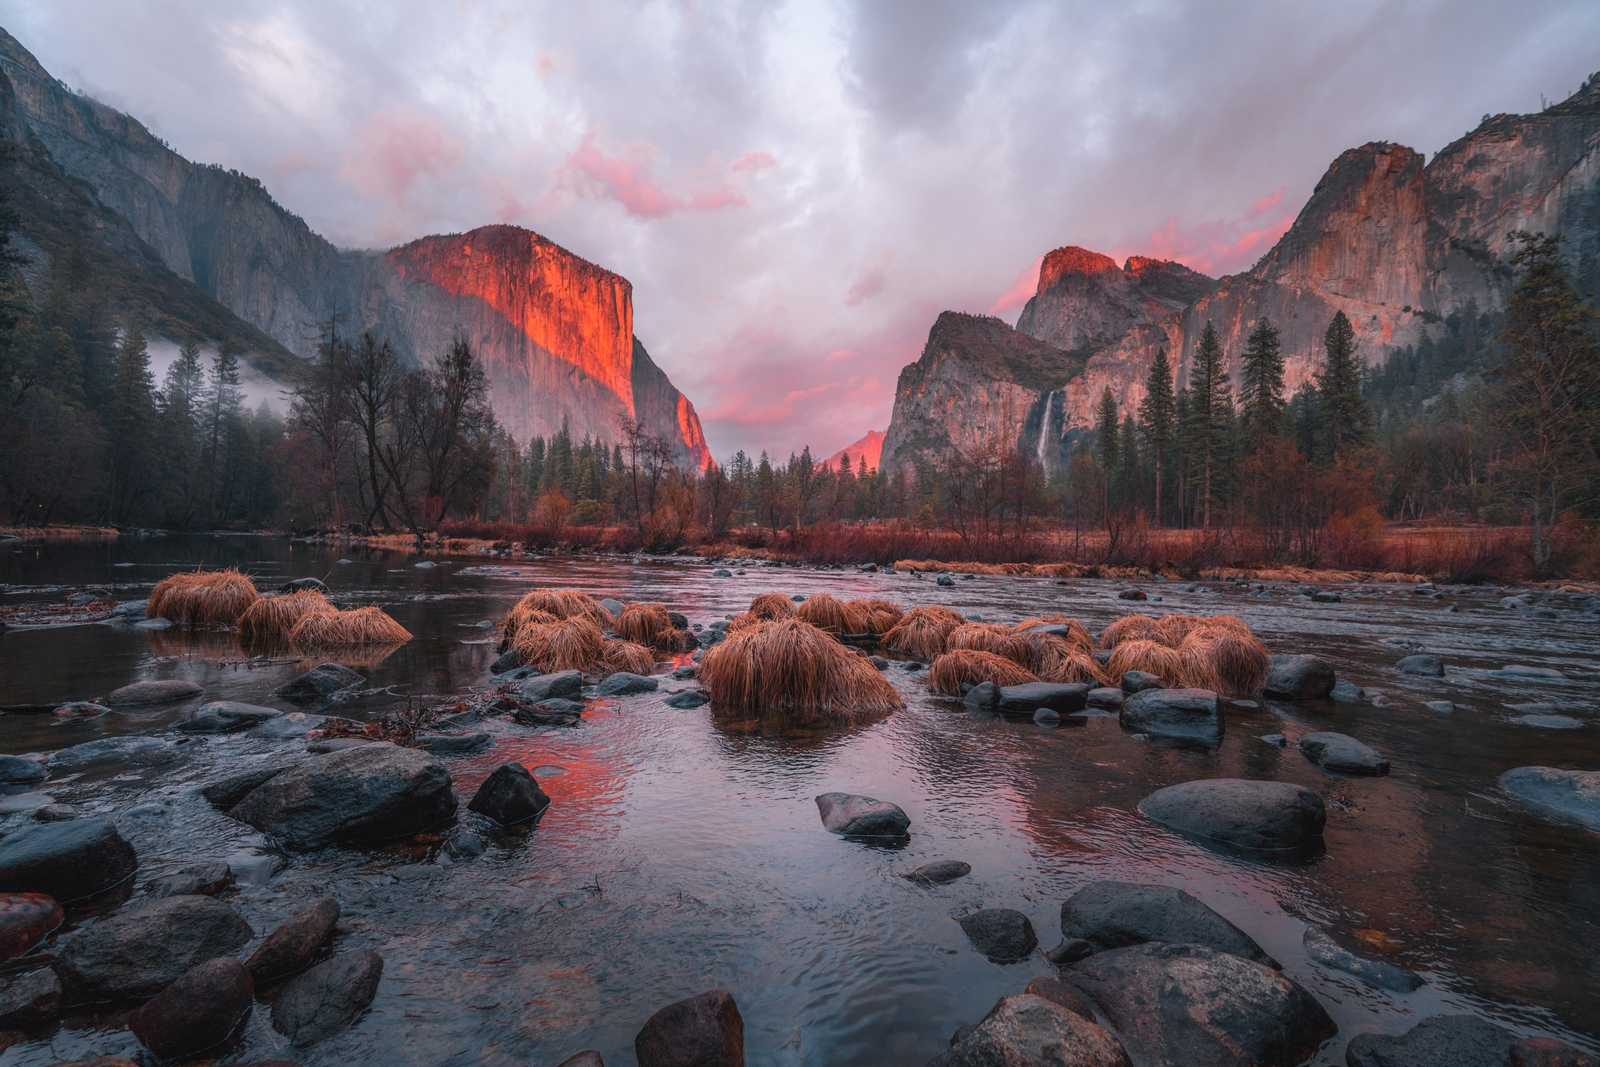 Top 5 Photography Spots in Yosemite National Park